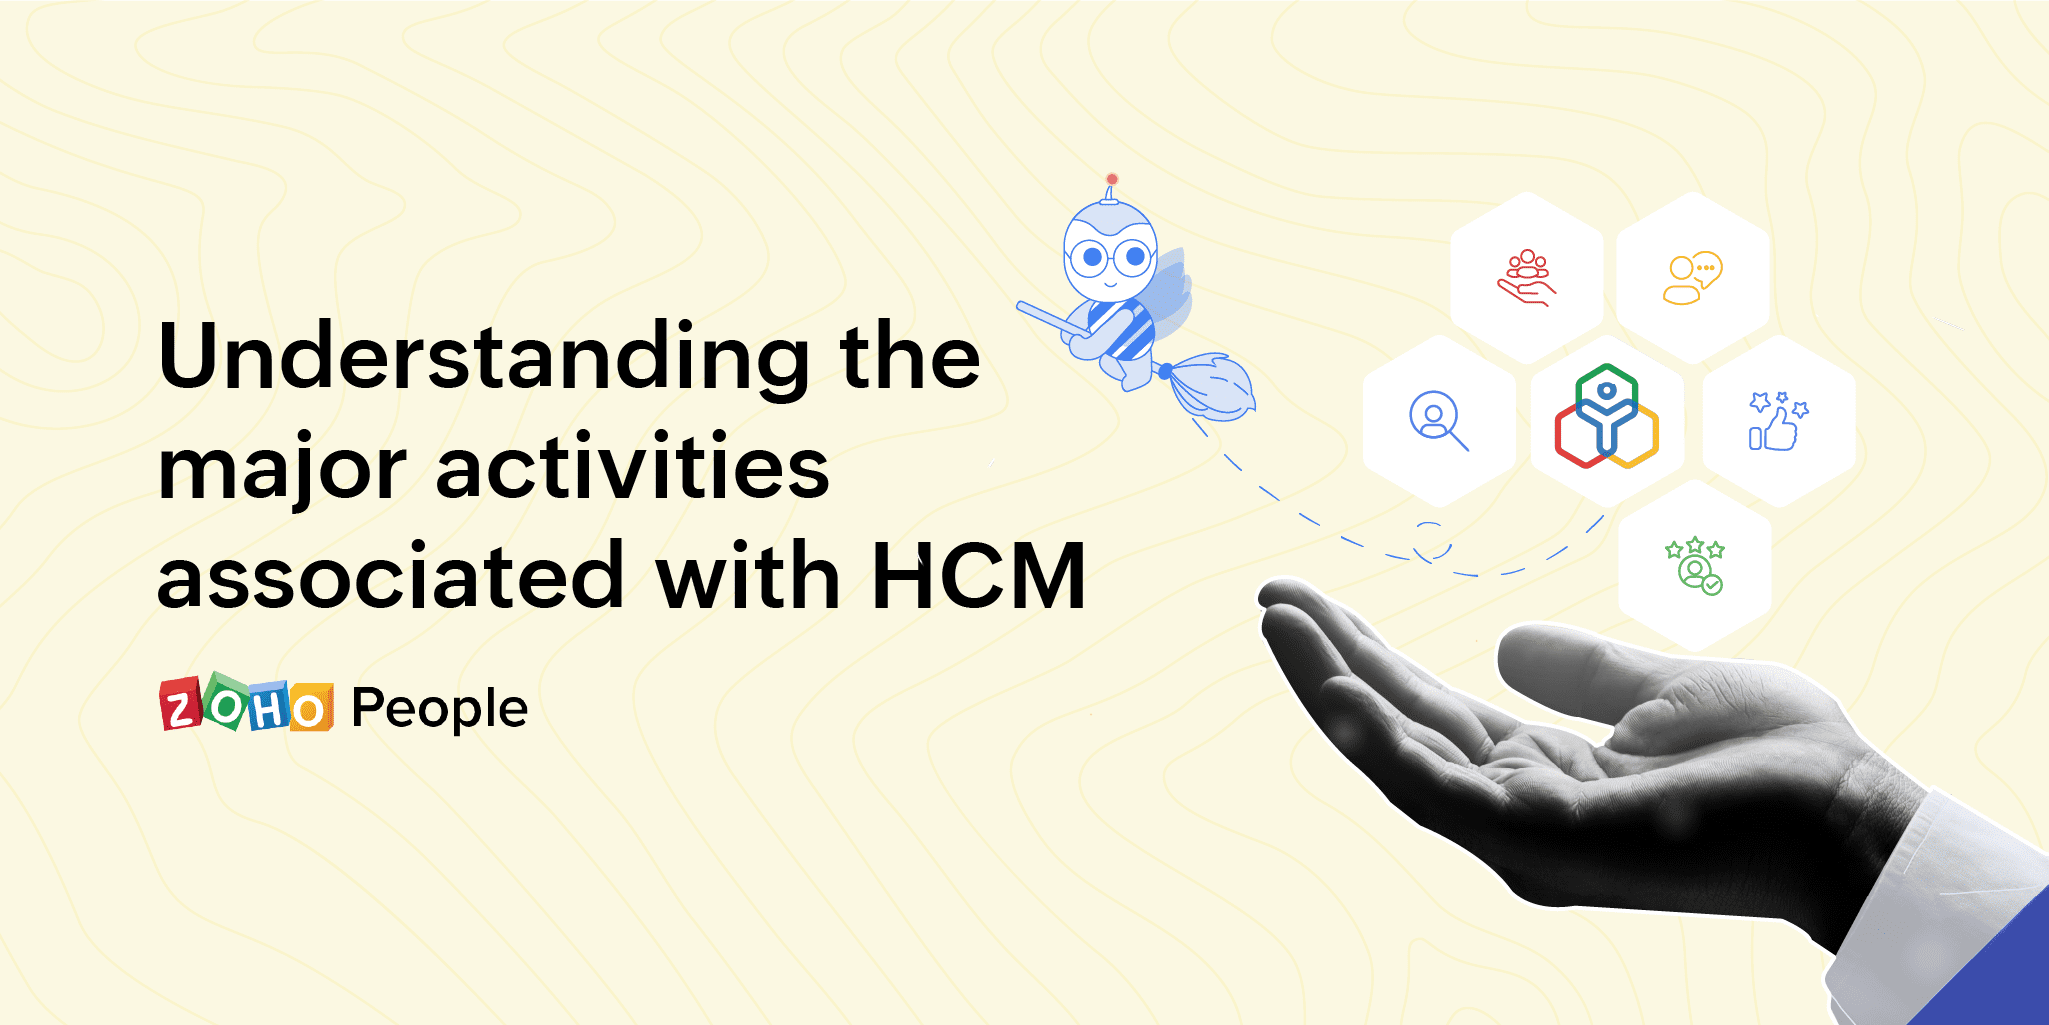 What are the key activities associated with Human Capital Management?